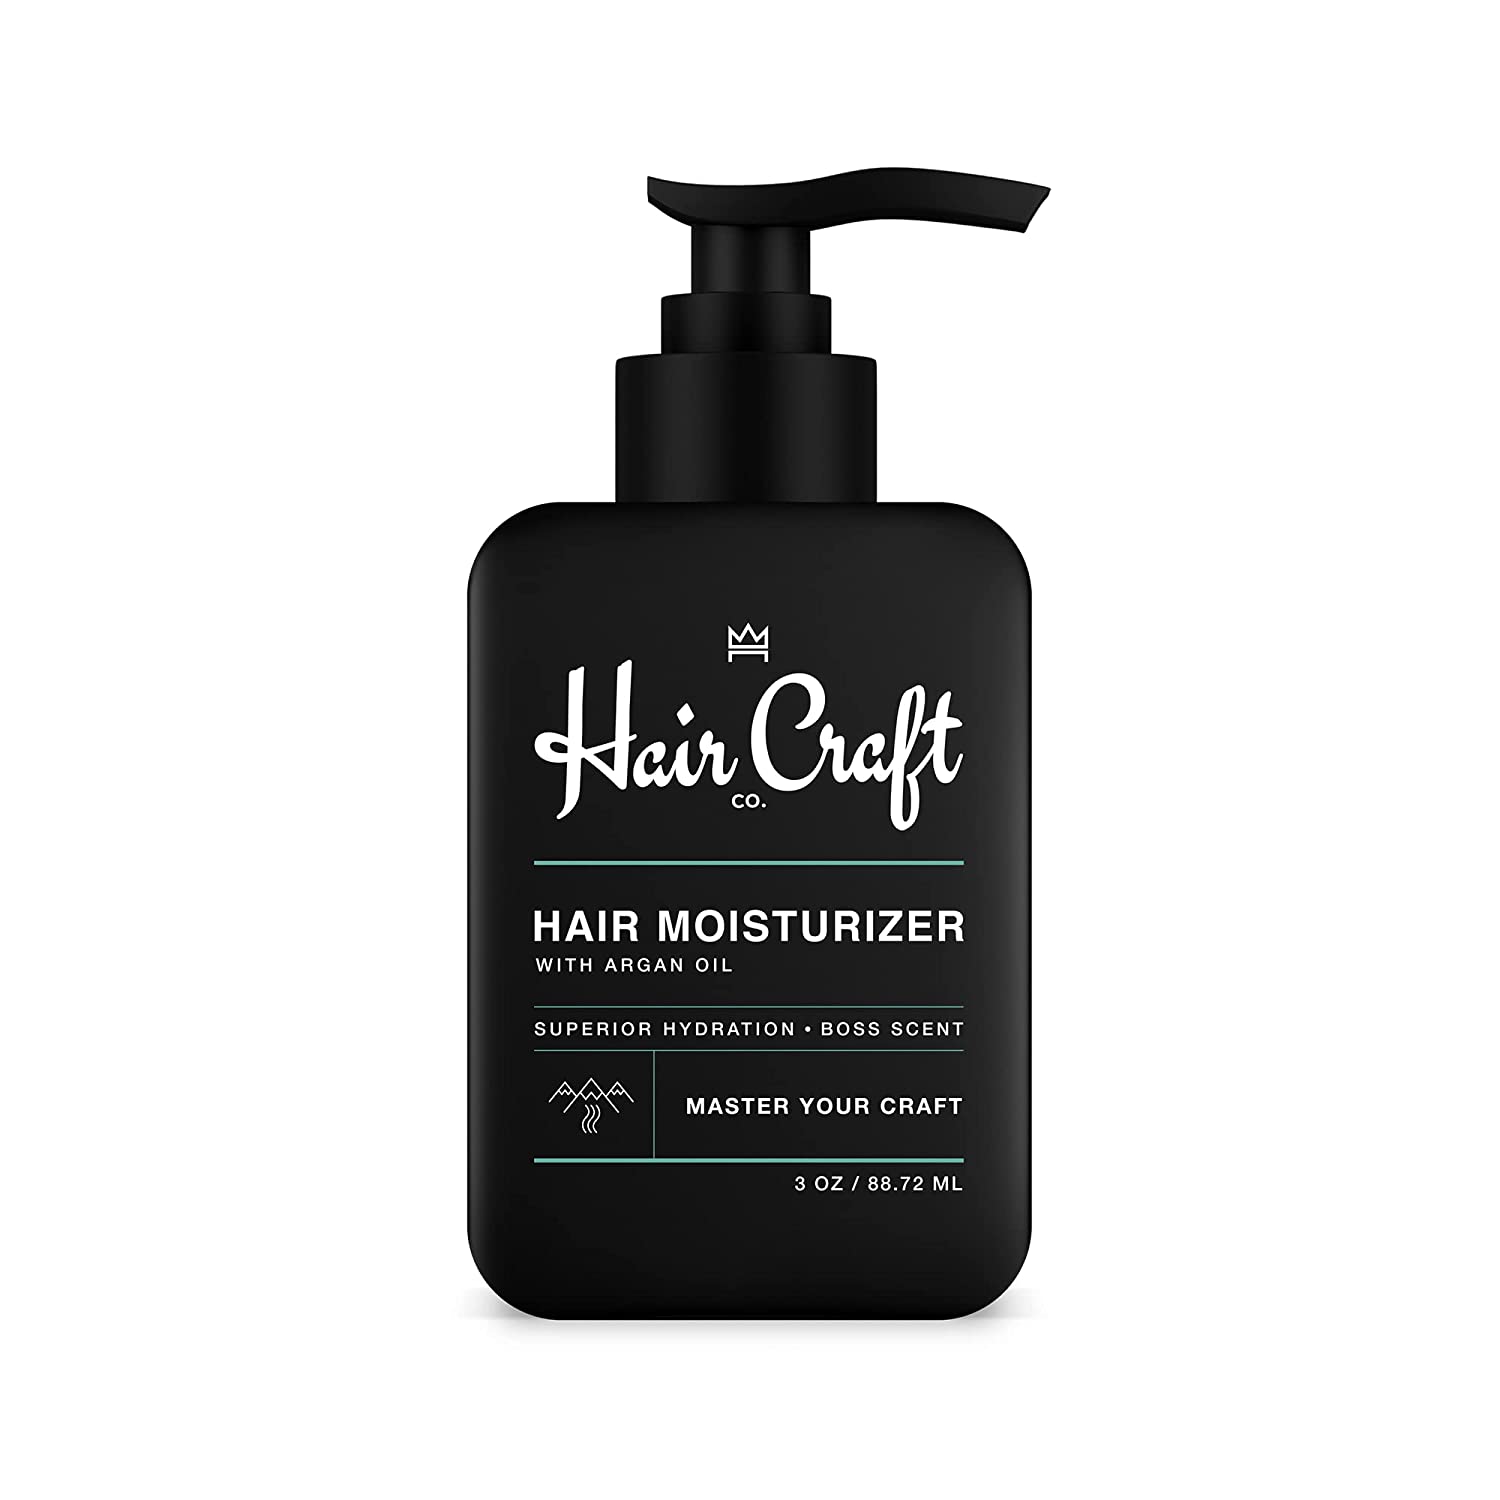 Hair Craft Co. Leave-In Conditioner Hair Moisturizer